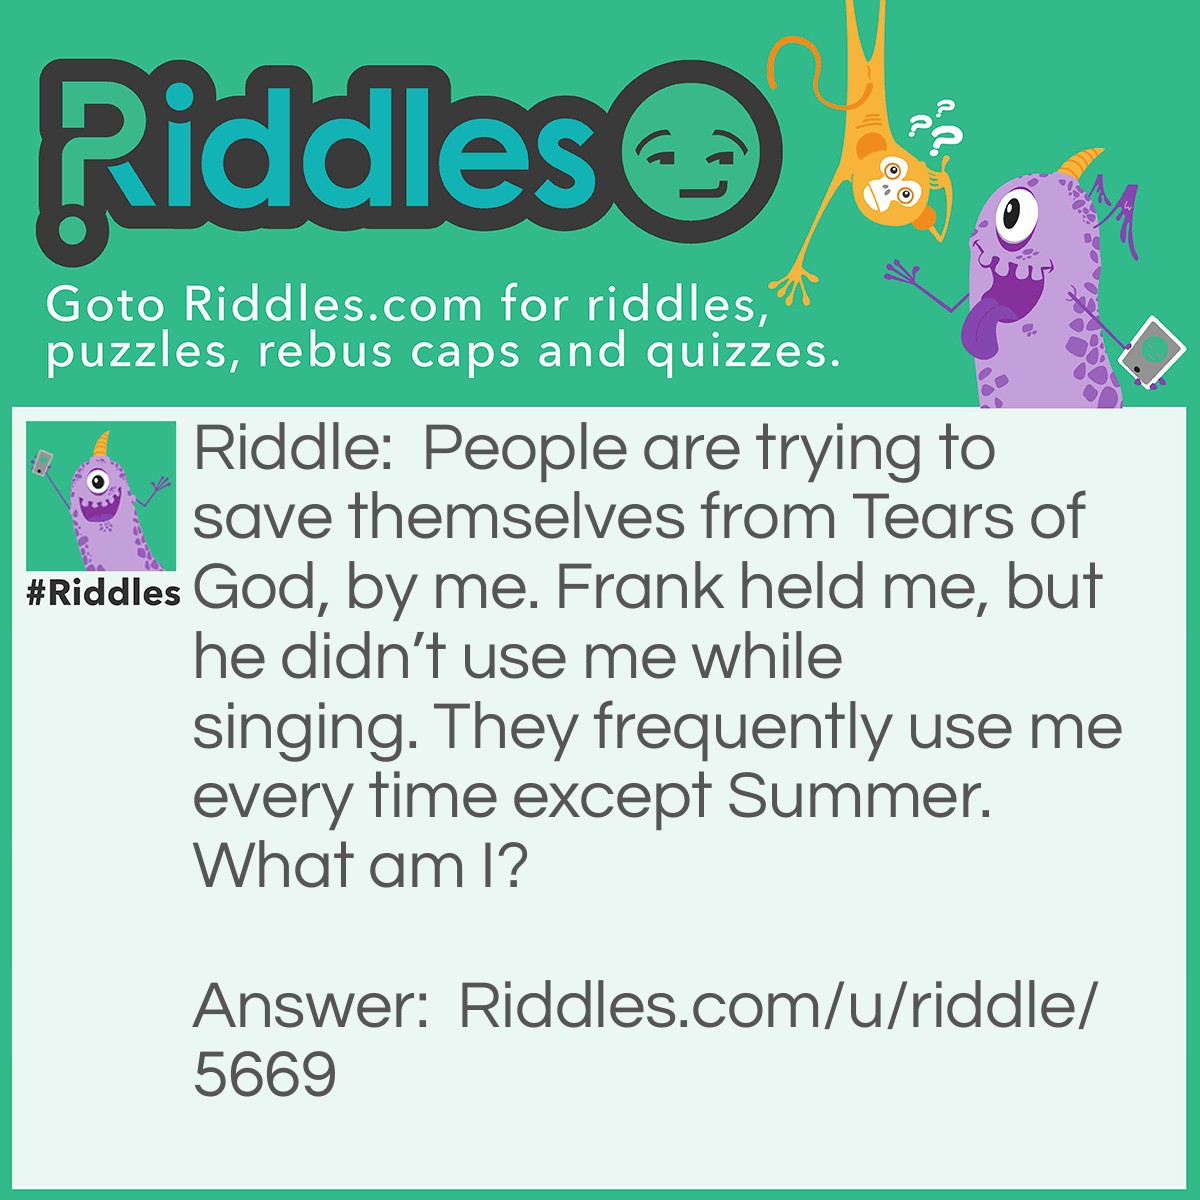 Riddle: People are trying to save themselves from Tears of God, by me. Frank held me, but he didn't use me while singing. They frequently use me every time except Summer. What am I? Answer: Umbrella.